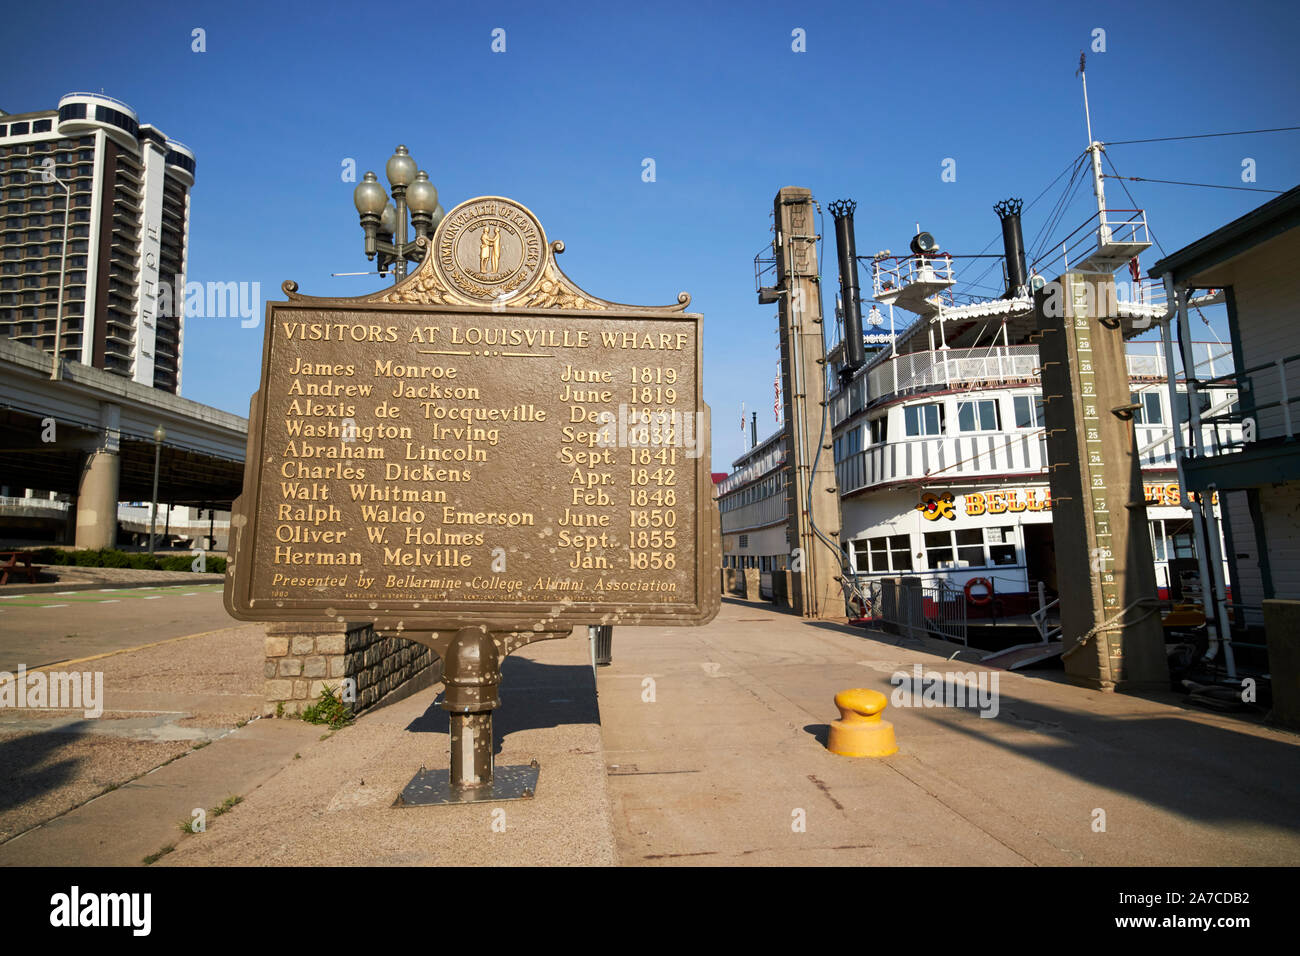 visitors at louisville wharf listed on historical plaque marker in downtown louisville kentucky USA Stock Photo